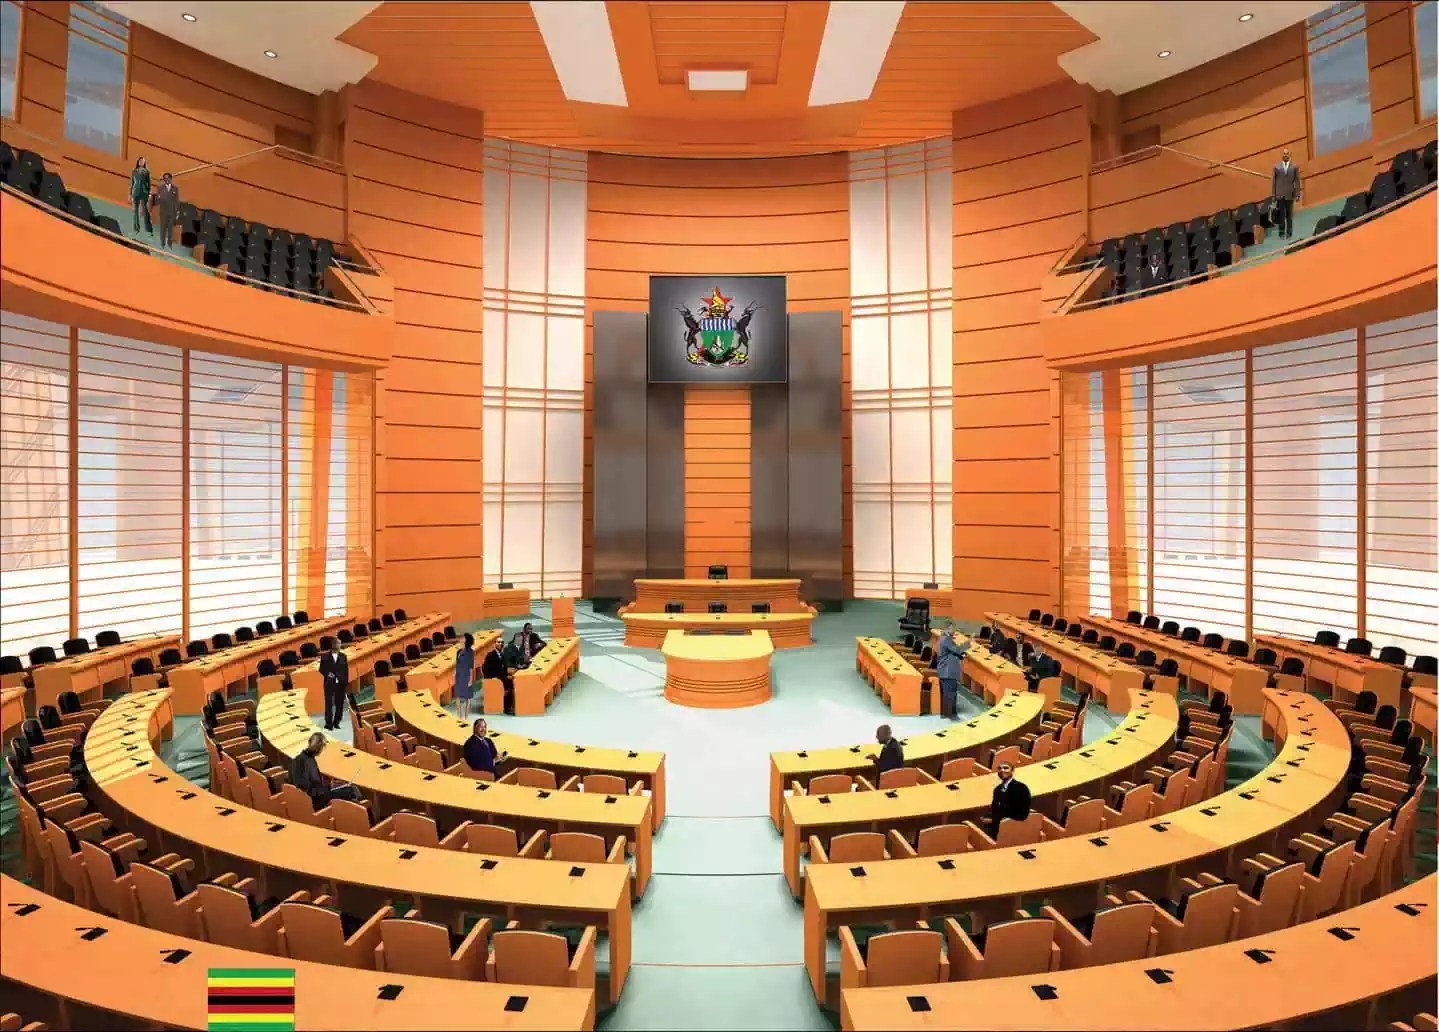 Primary chamber in New Parliament of Zimbabwe, with circular seating arrangement